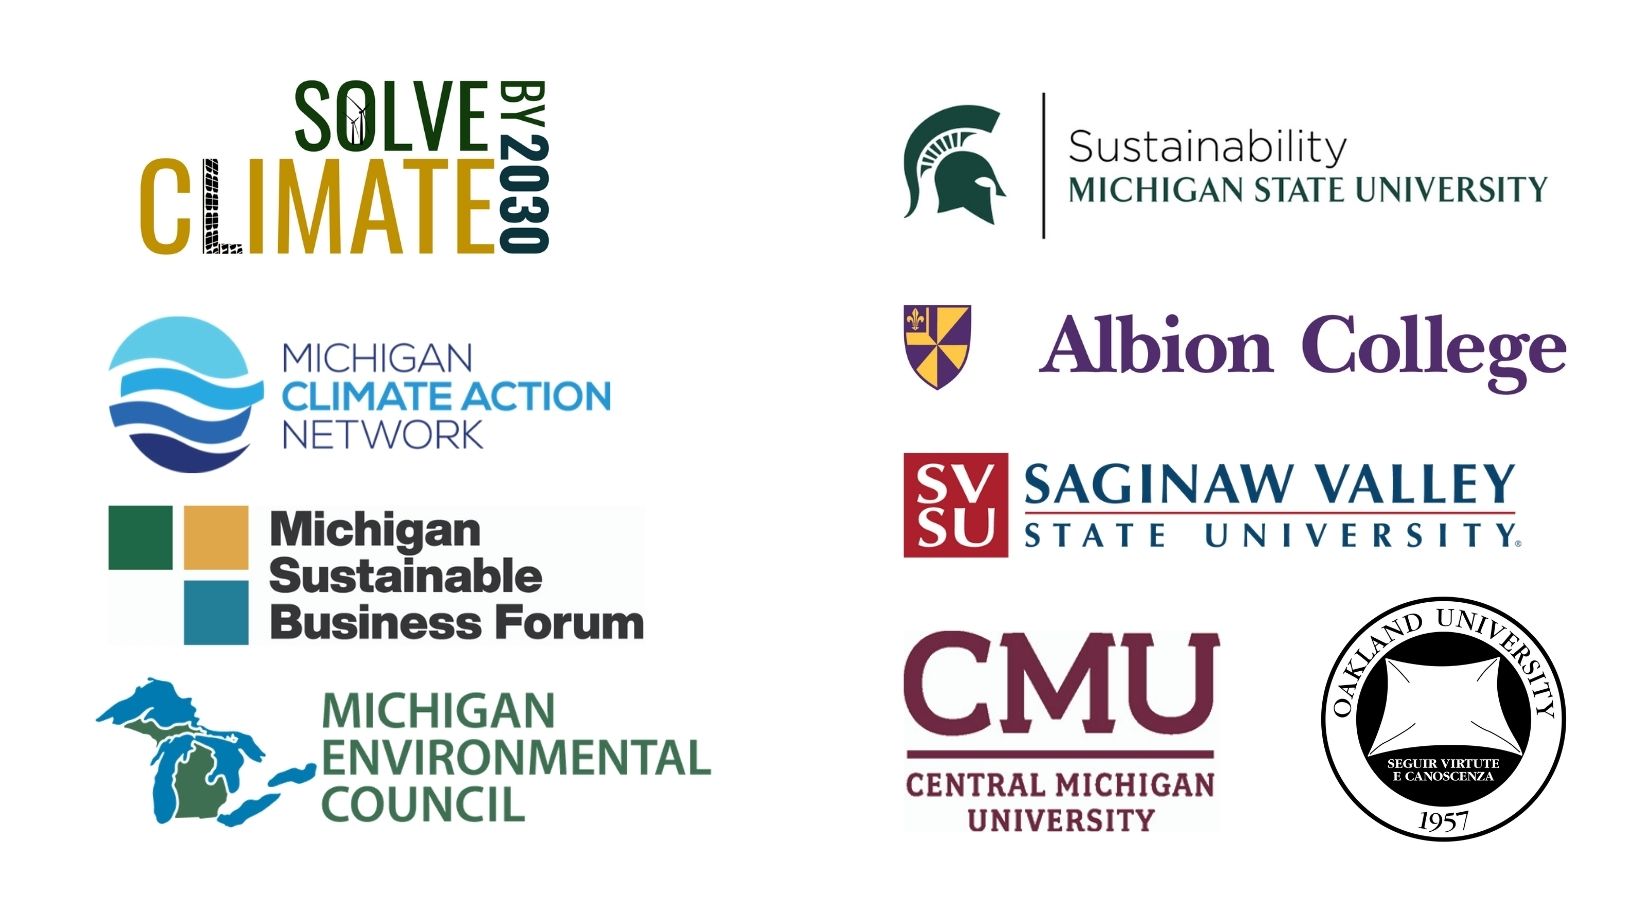 Logos for Partners: Solve Climate by 2030, MSU Sustainability, Central Michigan University, Albion College, Saginaw Valley State University, Oakland University, Michigan Climate Action Network, Michigan Sustainable Business Forum, Michigan Environmental Action Council, 